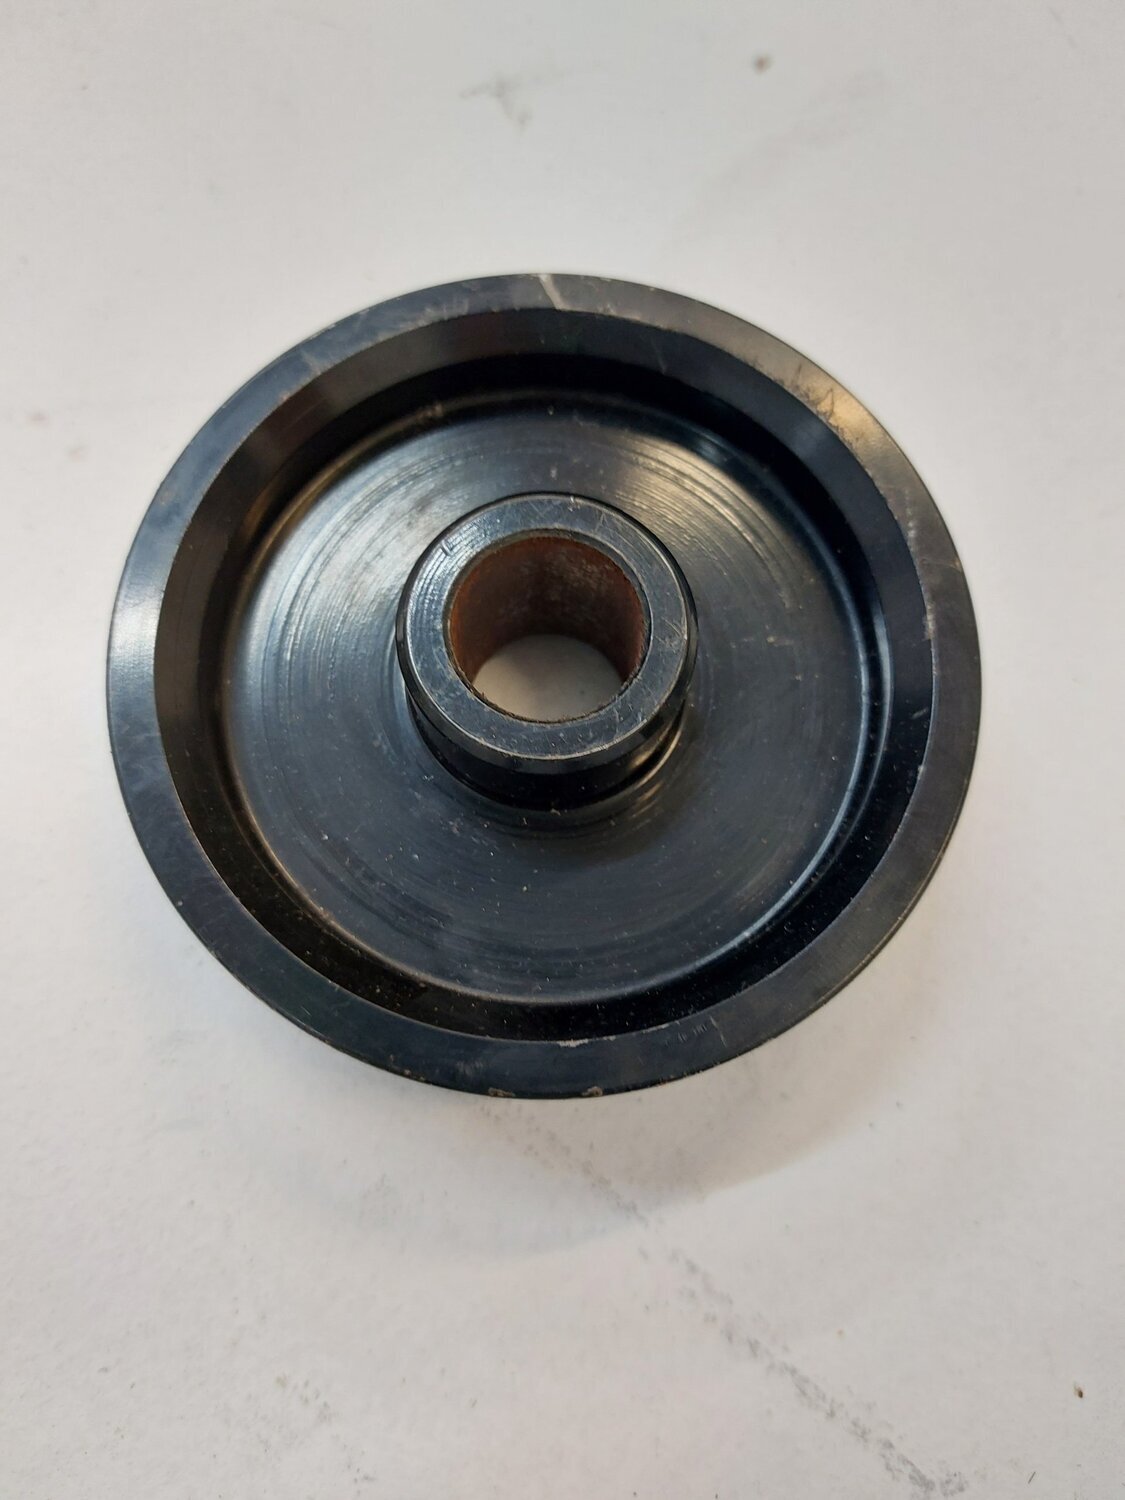 vx220 used supercharger standard pulley